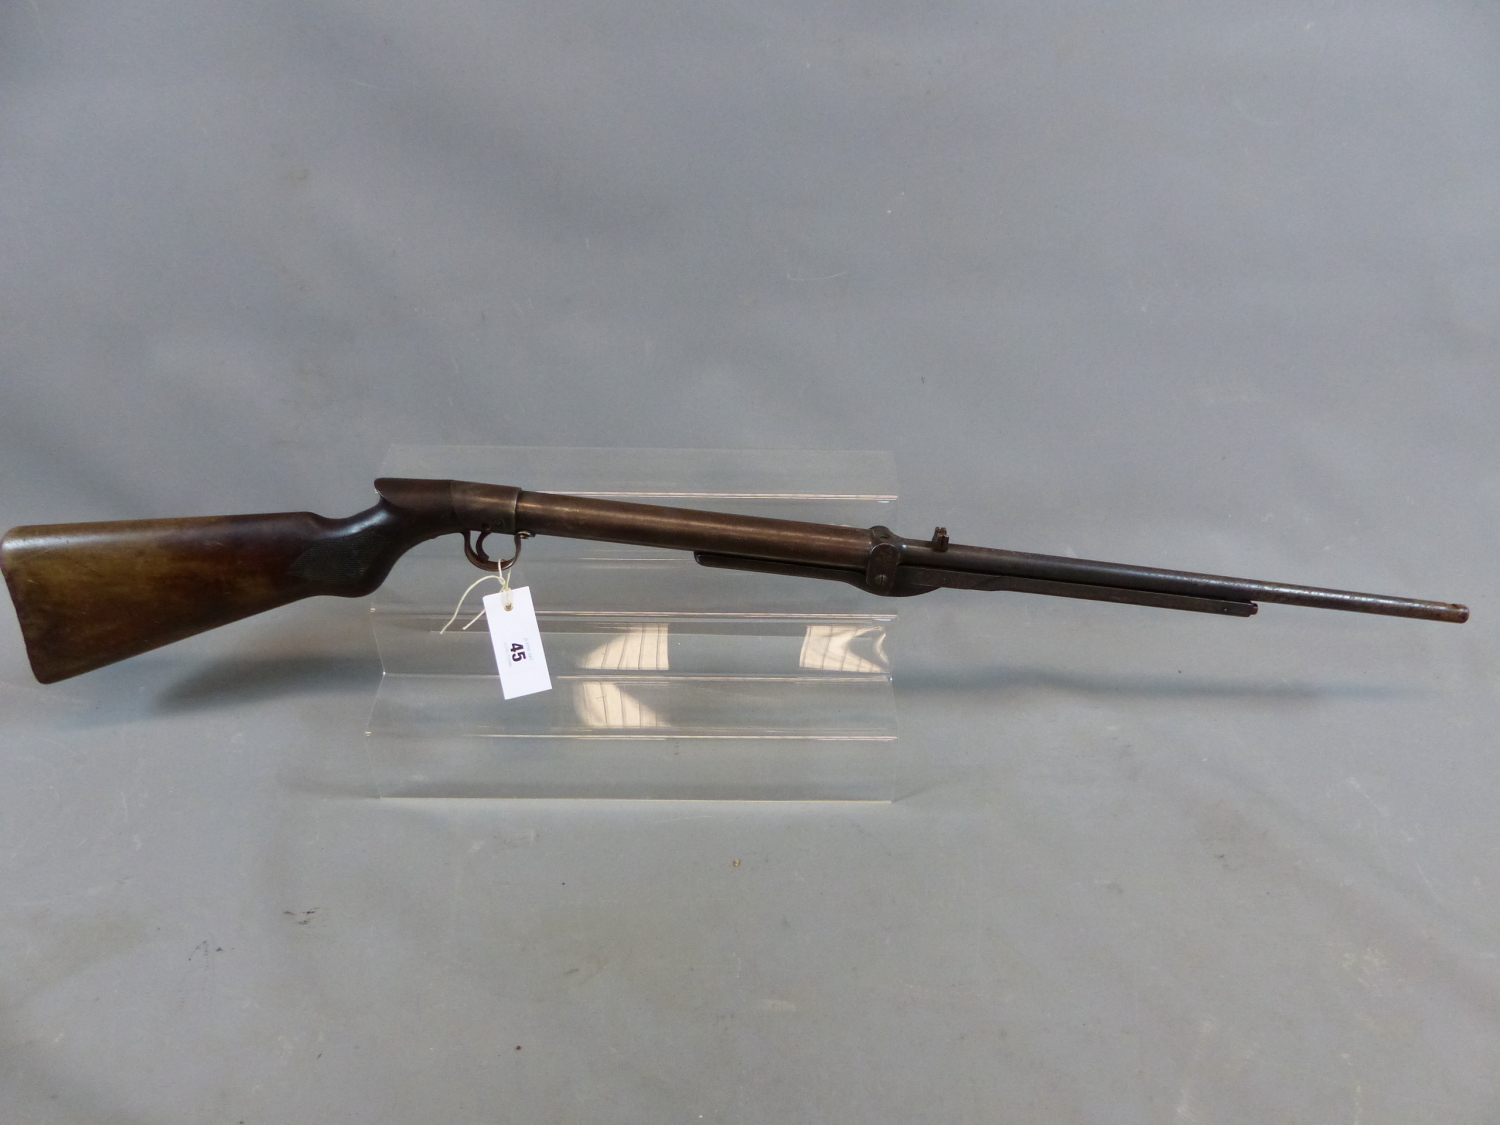 A VINTAGE UN-NAMED UNDERLEVER TAP LOADING AIR RIFLE SERIAL NUMBER S11845 ( NO CERTIFICATE